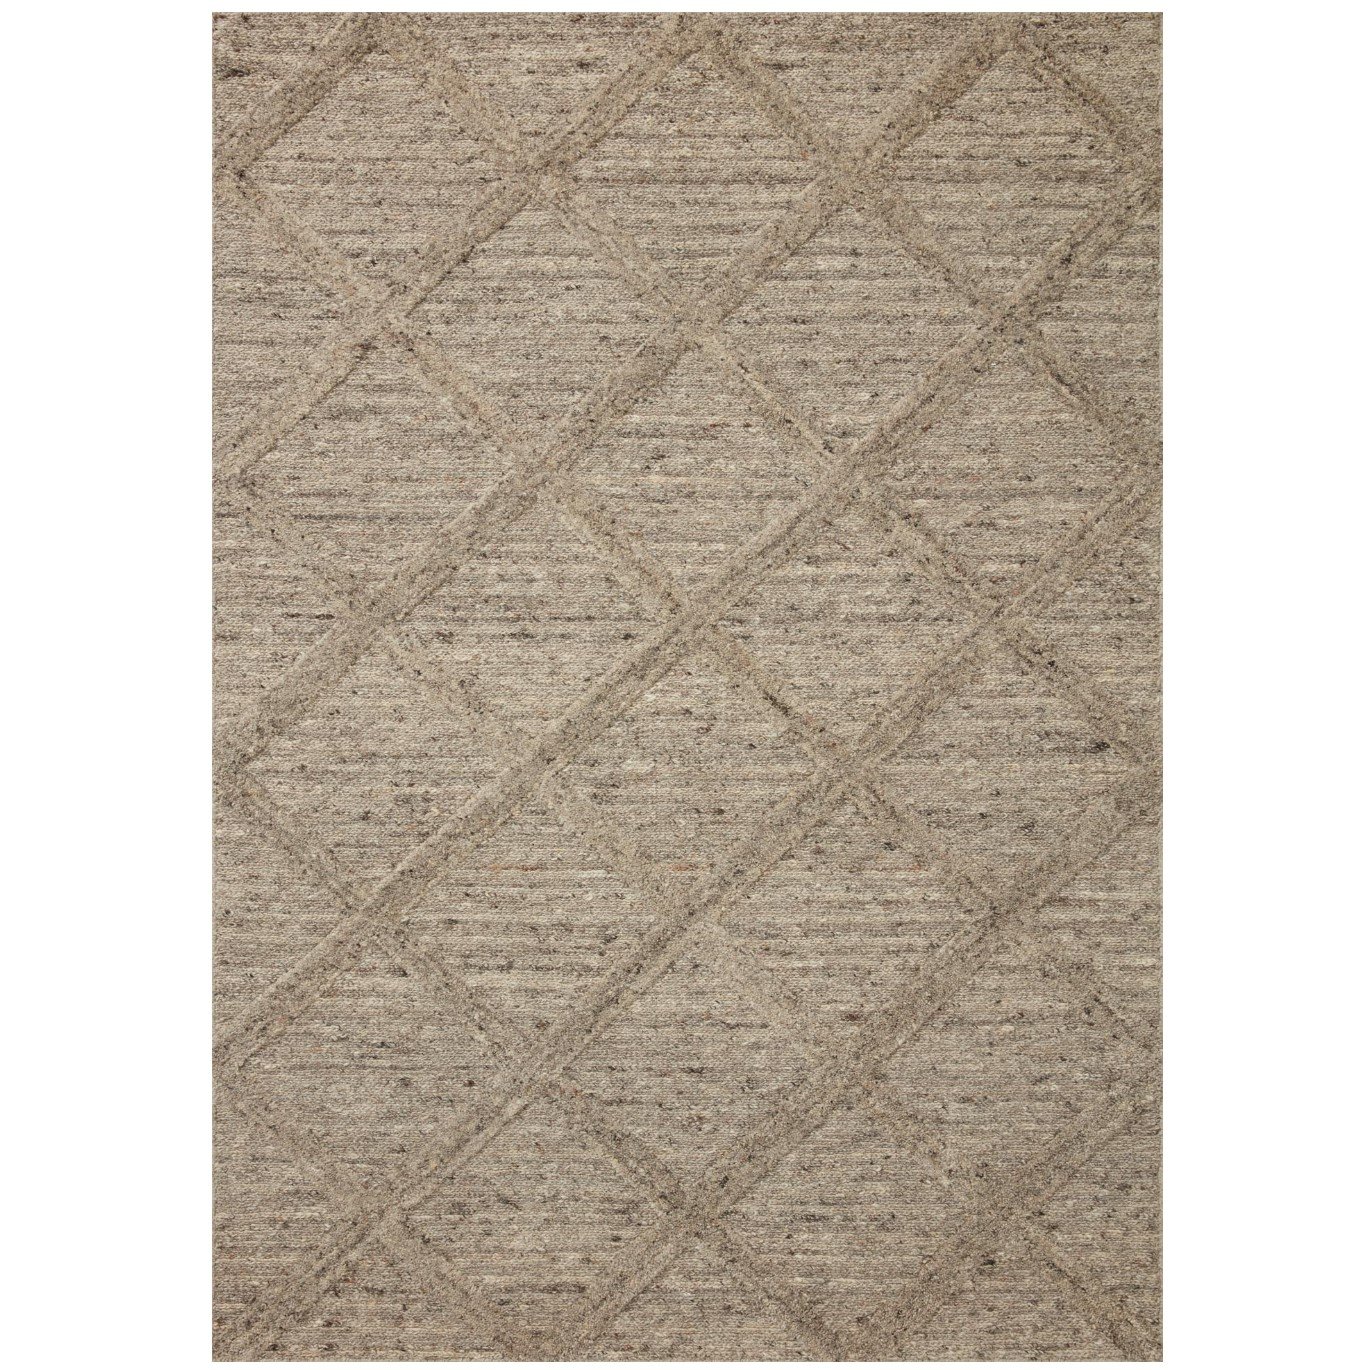 Hunter Dove Rug Items range from $119.00 to $1689.00